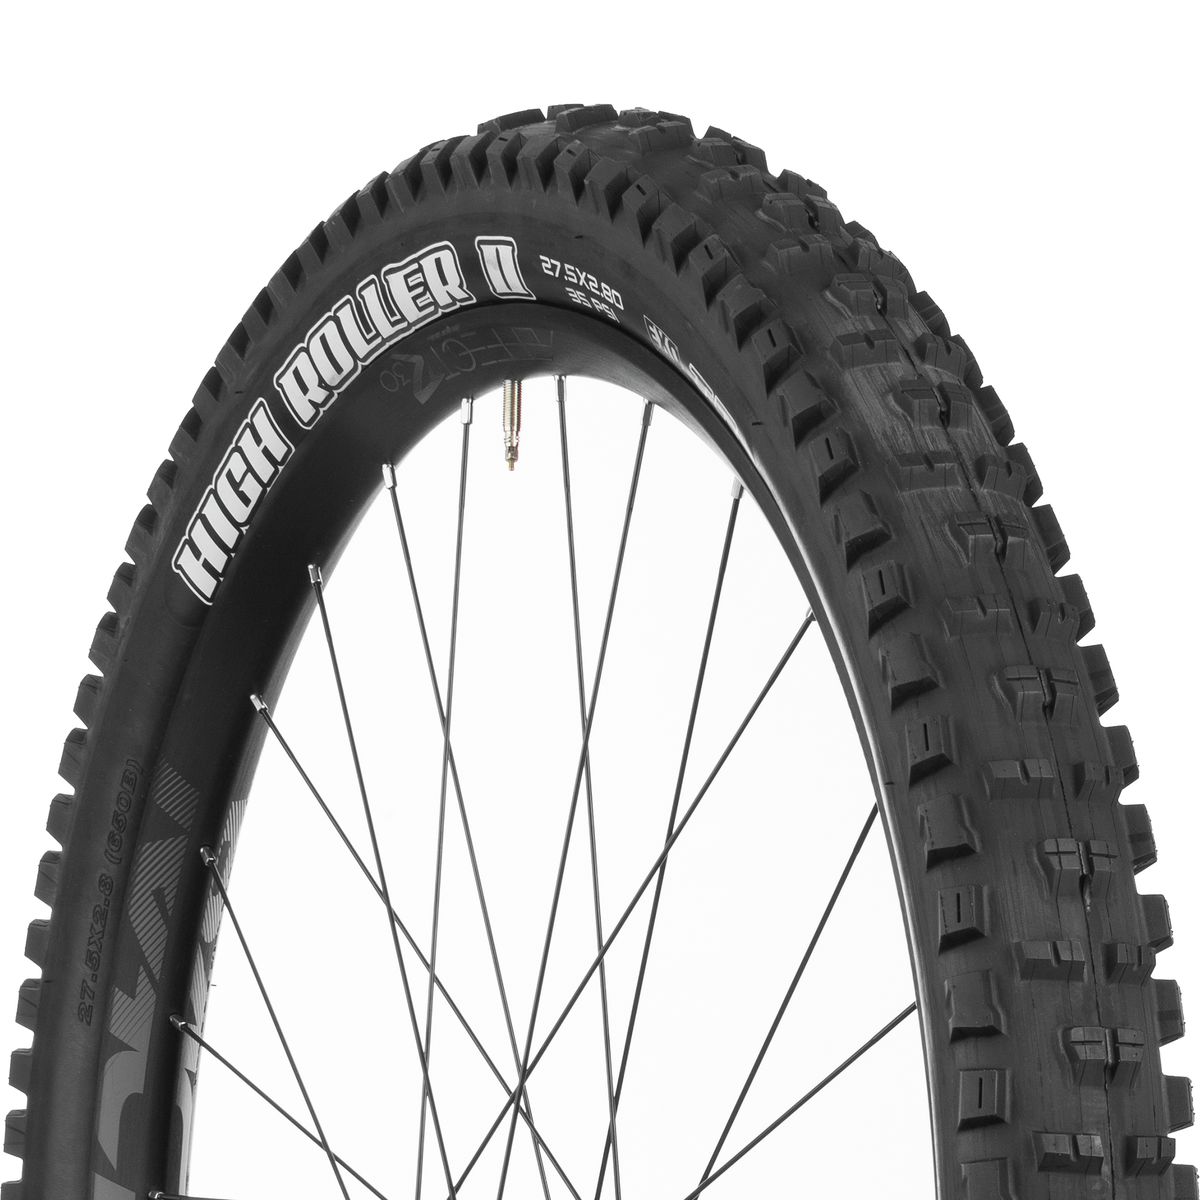 Maxxis High Roller II EXO/TR 27.5 Plus Tire